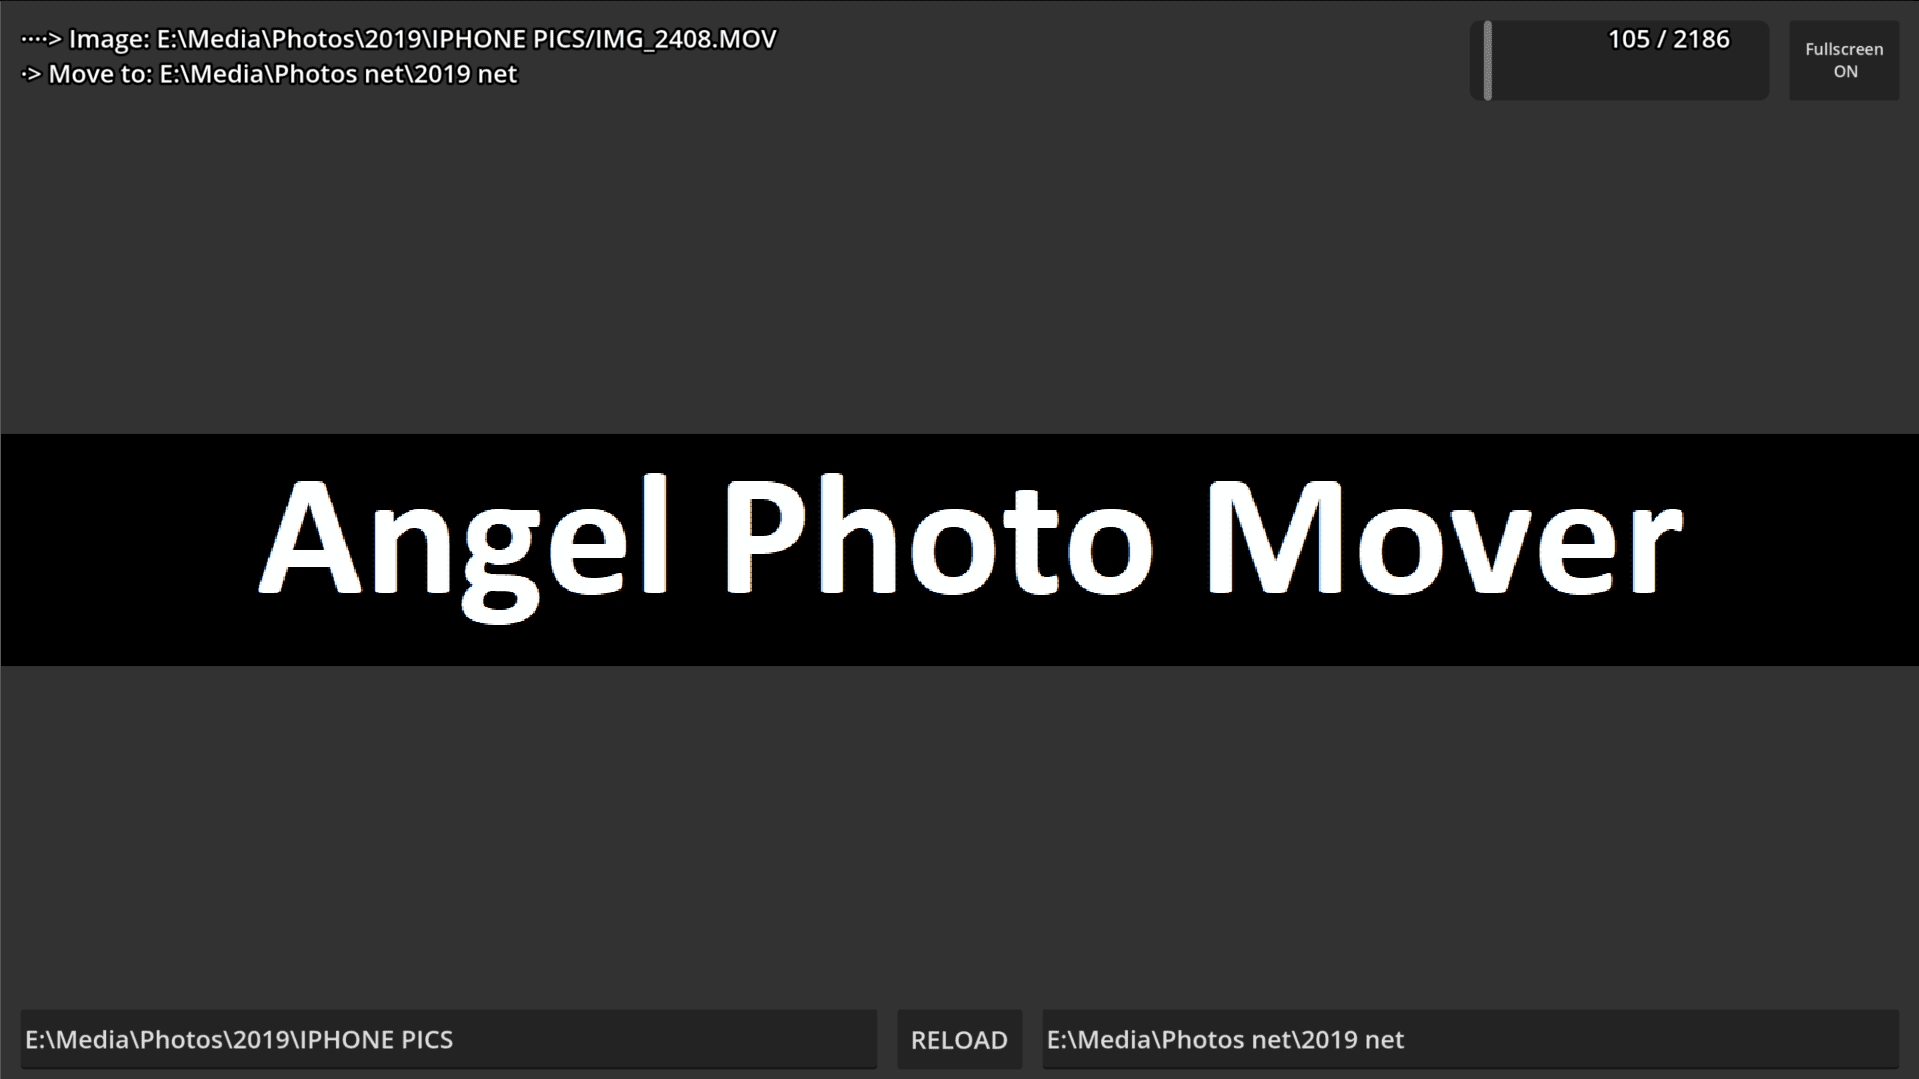 Angel Photo Mover